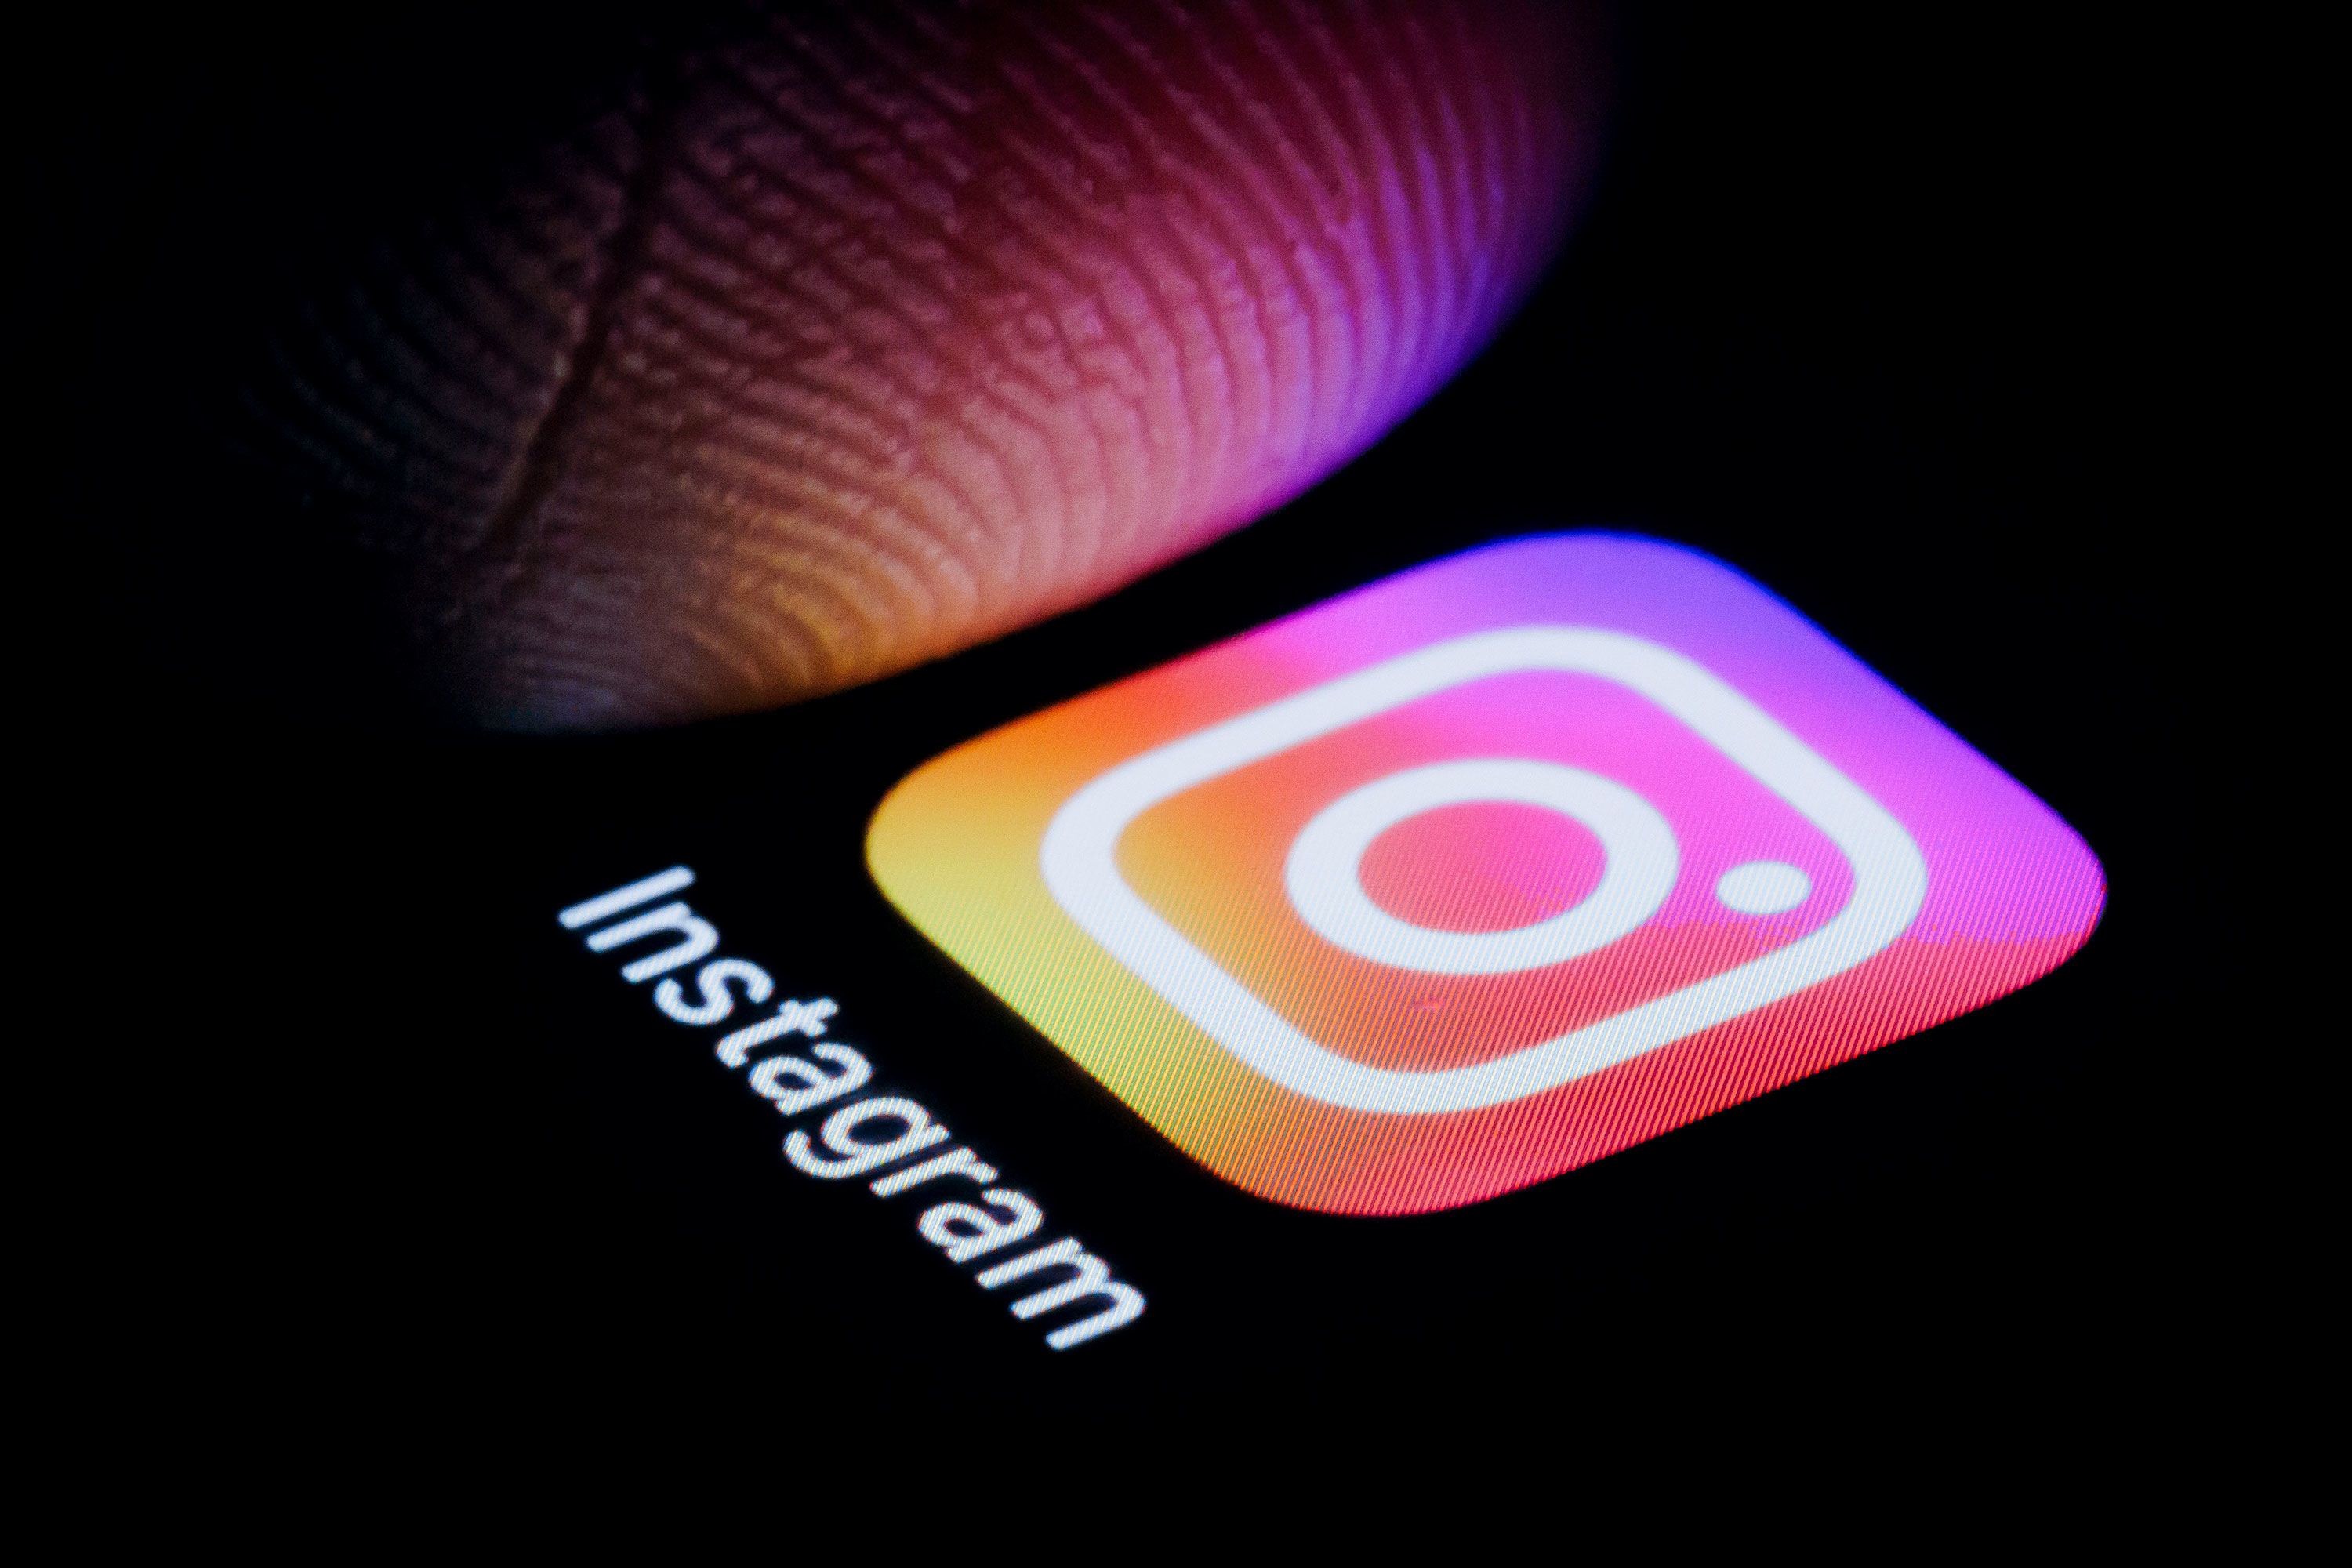 Instagram Lays off 60 Jobs Ahead of Court Hearing